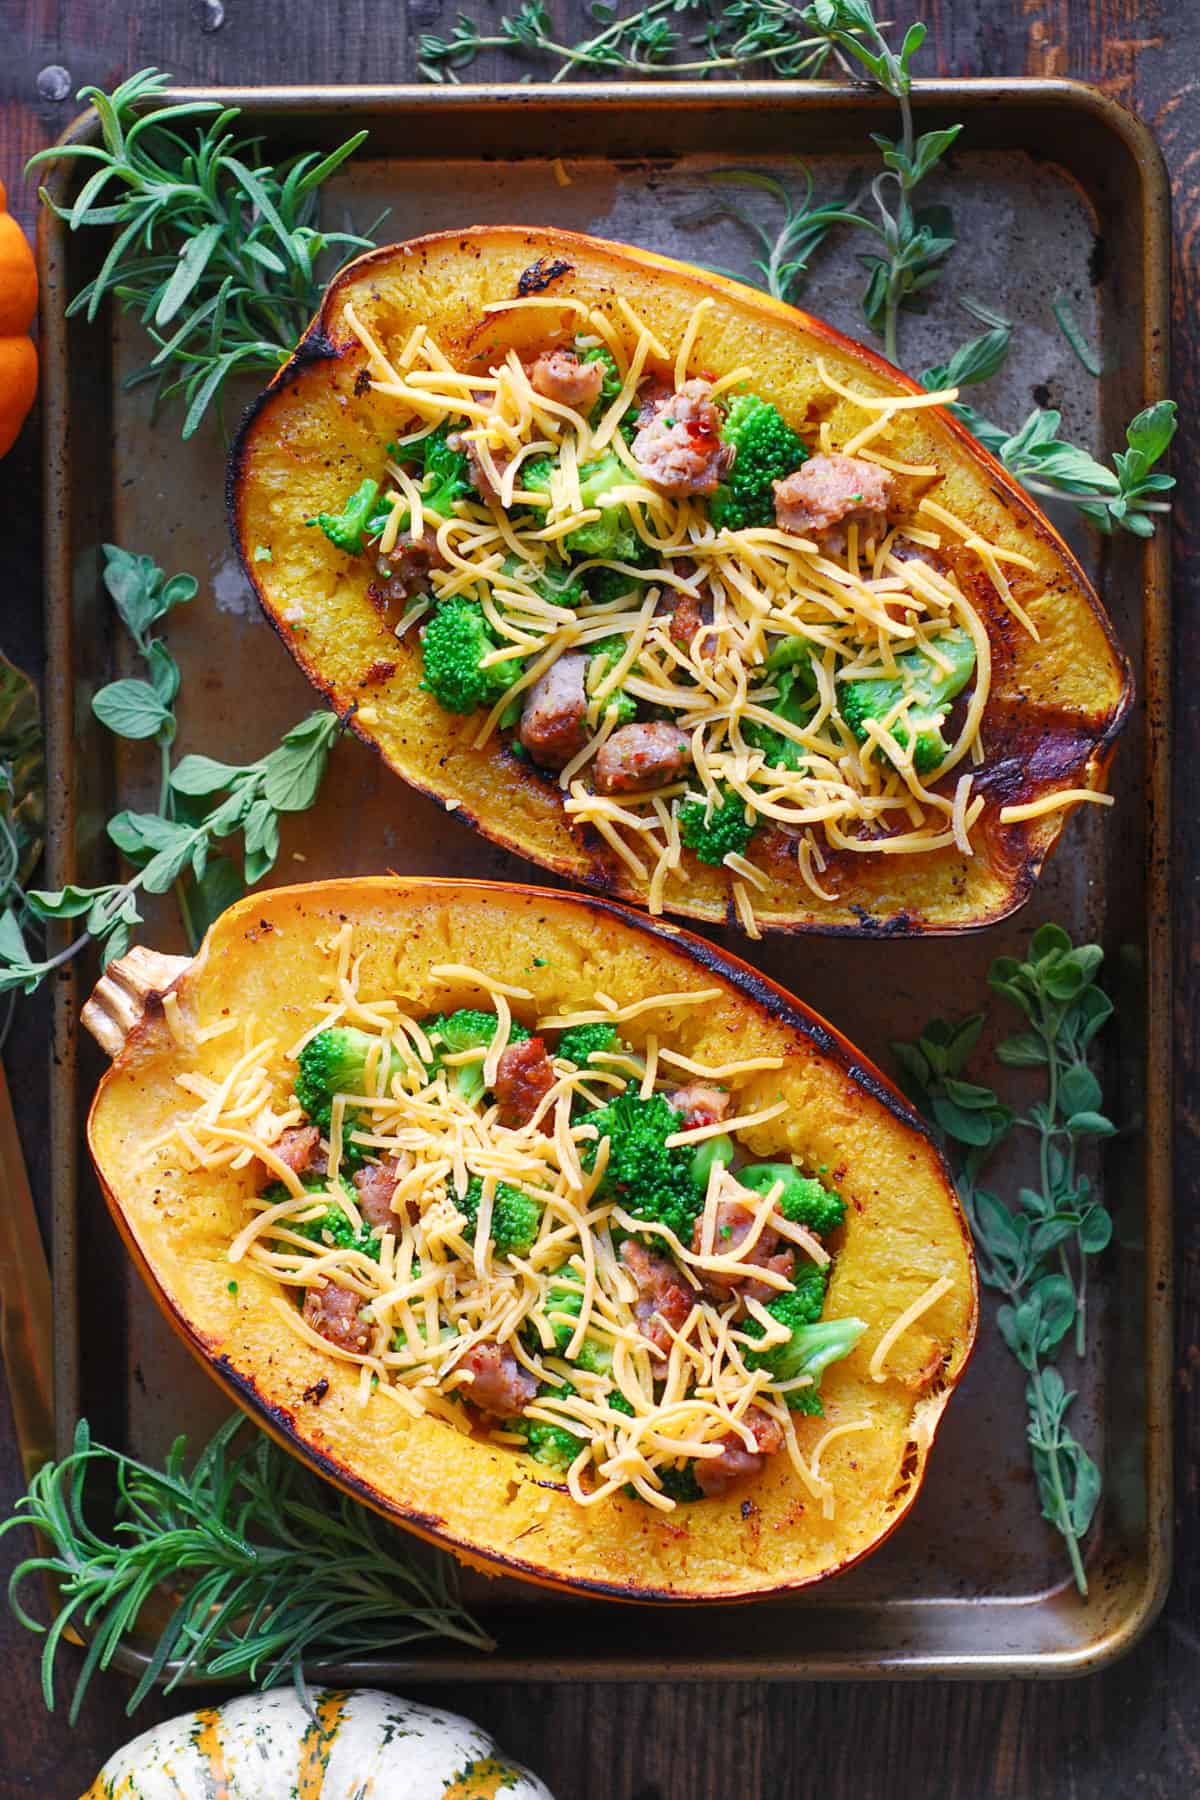 Stuffed Roasted Spaghetti Squash Halves (2) with Broccoli, Sausage, and Cheddar Cheese - on a baking sheet.